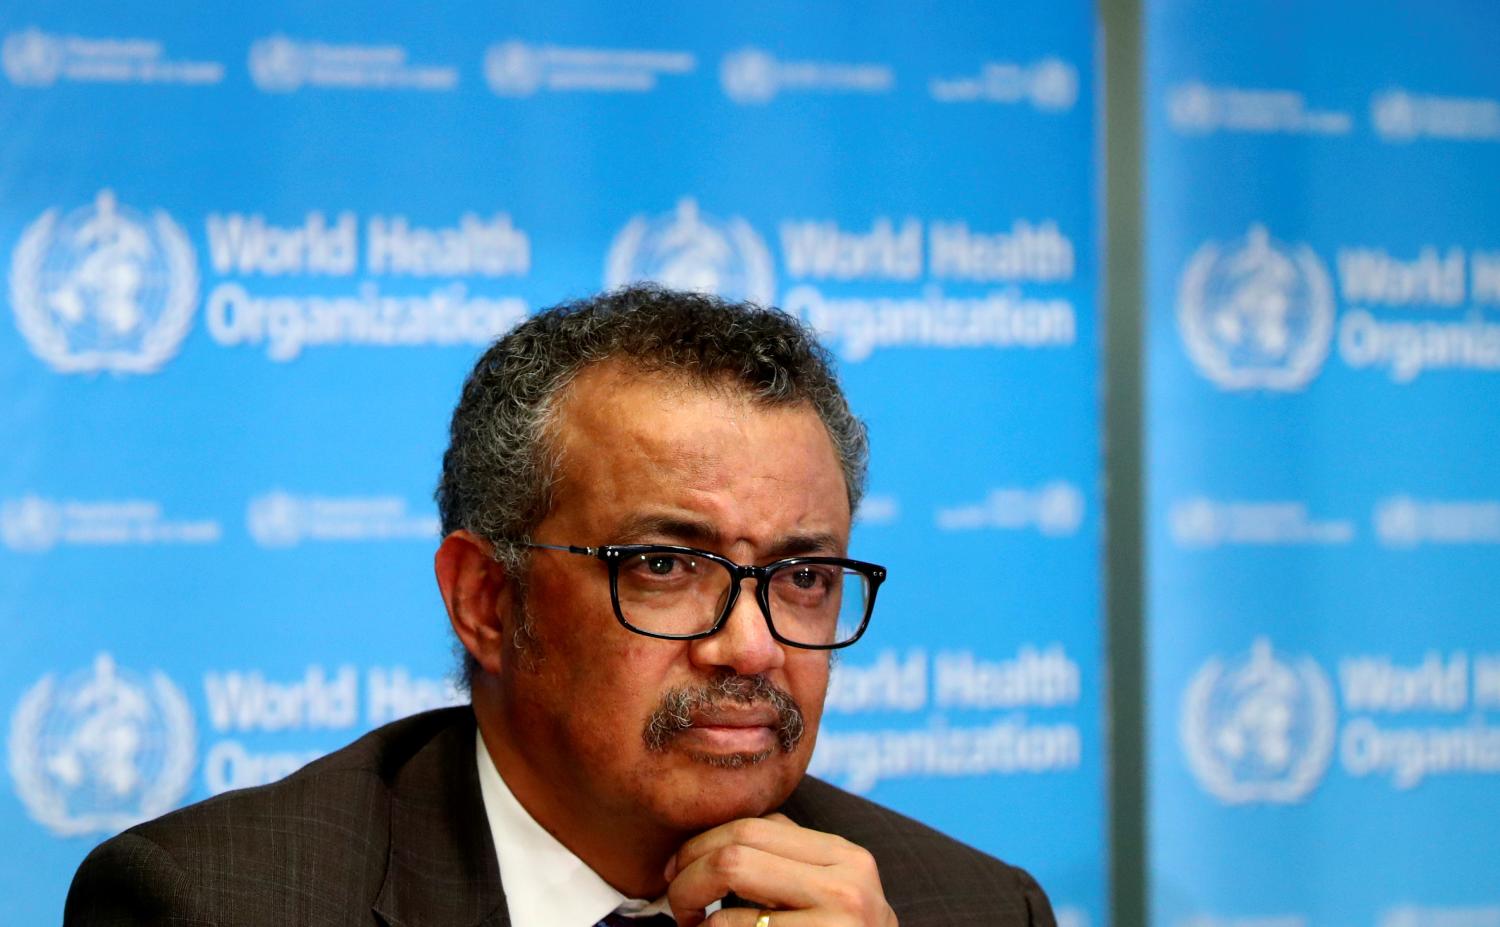 FILE PHOTO: Director General of the World Health Organization (WHO) Tedros Adhanom Ghebreyesus attends a news conference on the situation of the coronavirus (COVID-2019), in Geneva, Switzerland, February 28, 2020. REUTERS/Denis Balibouse/